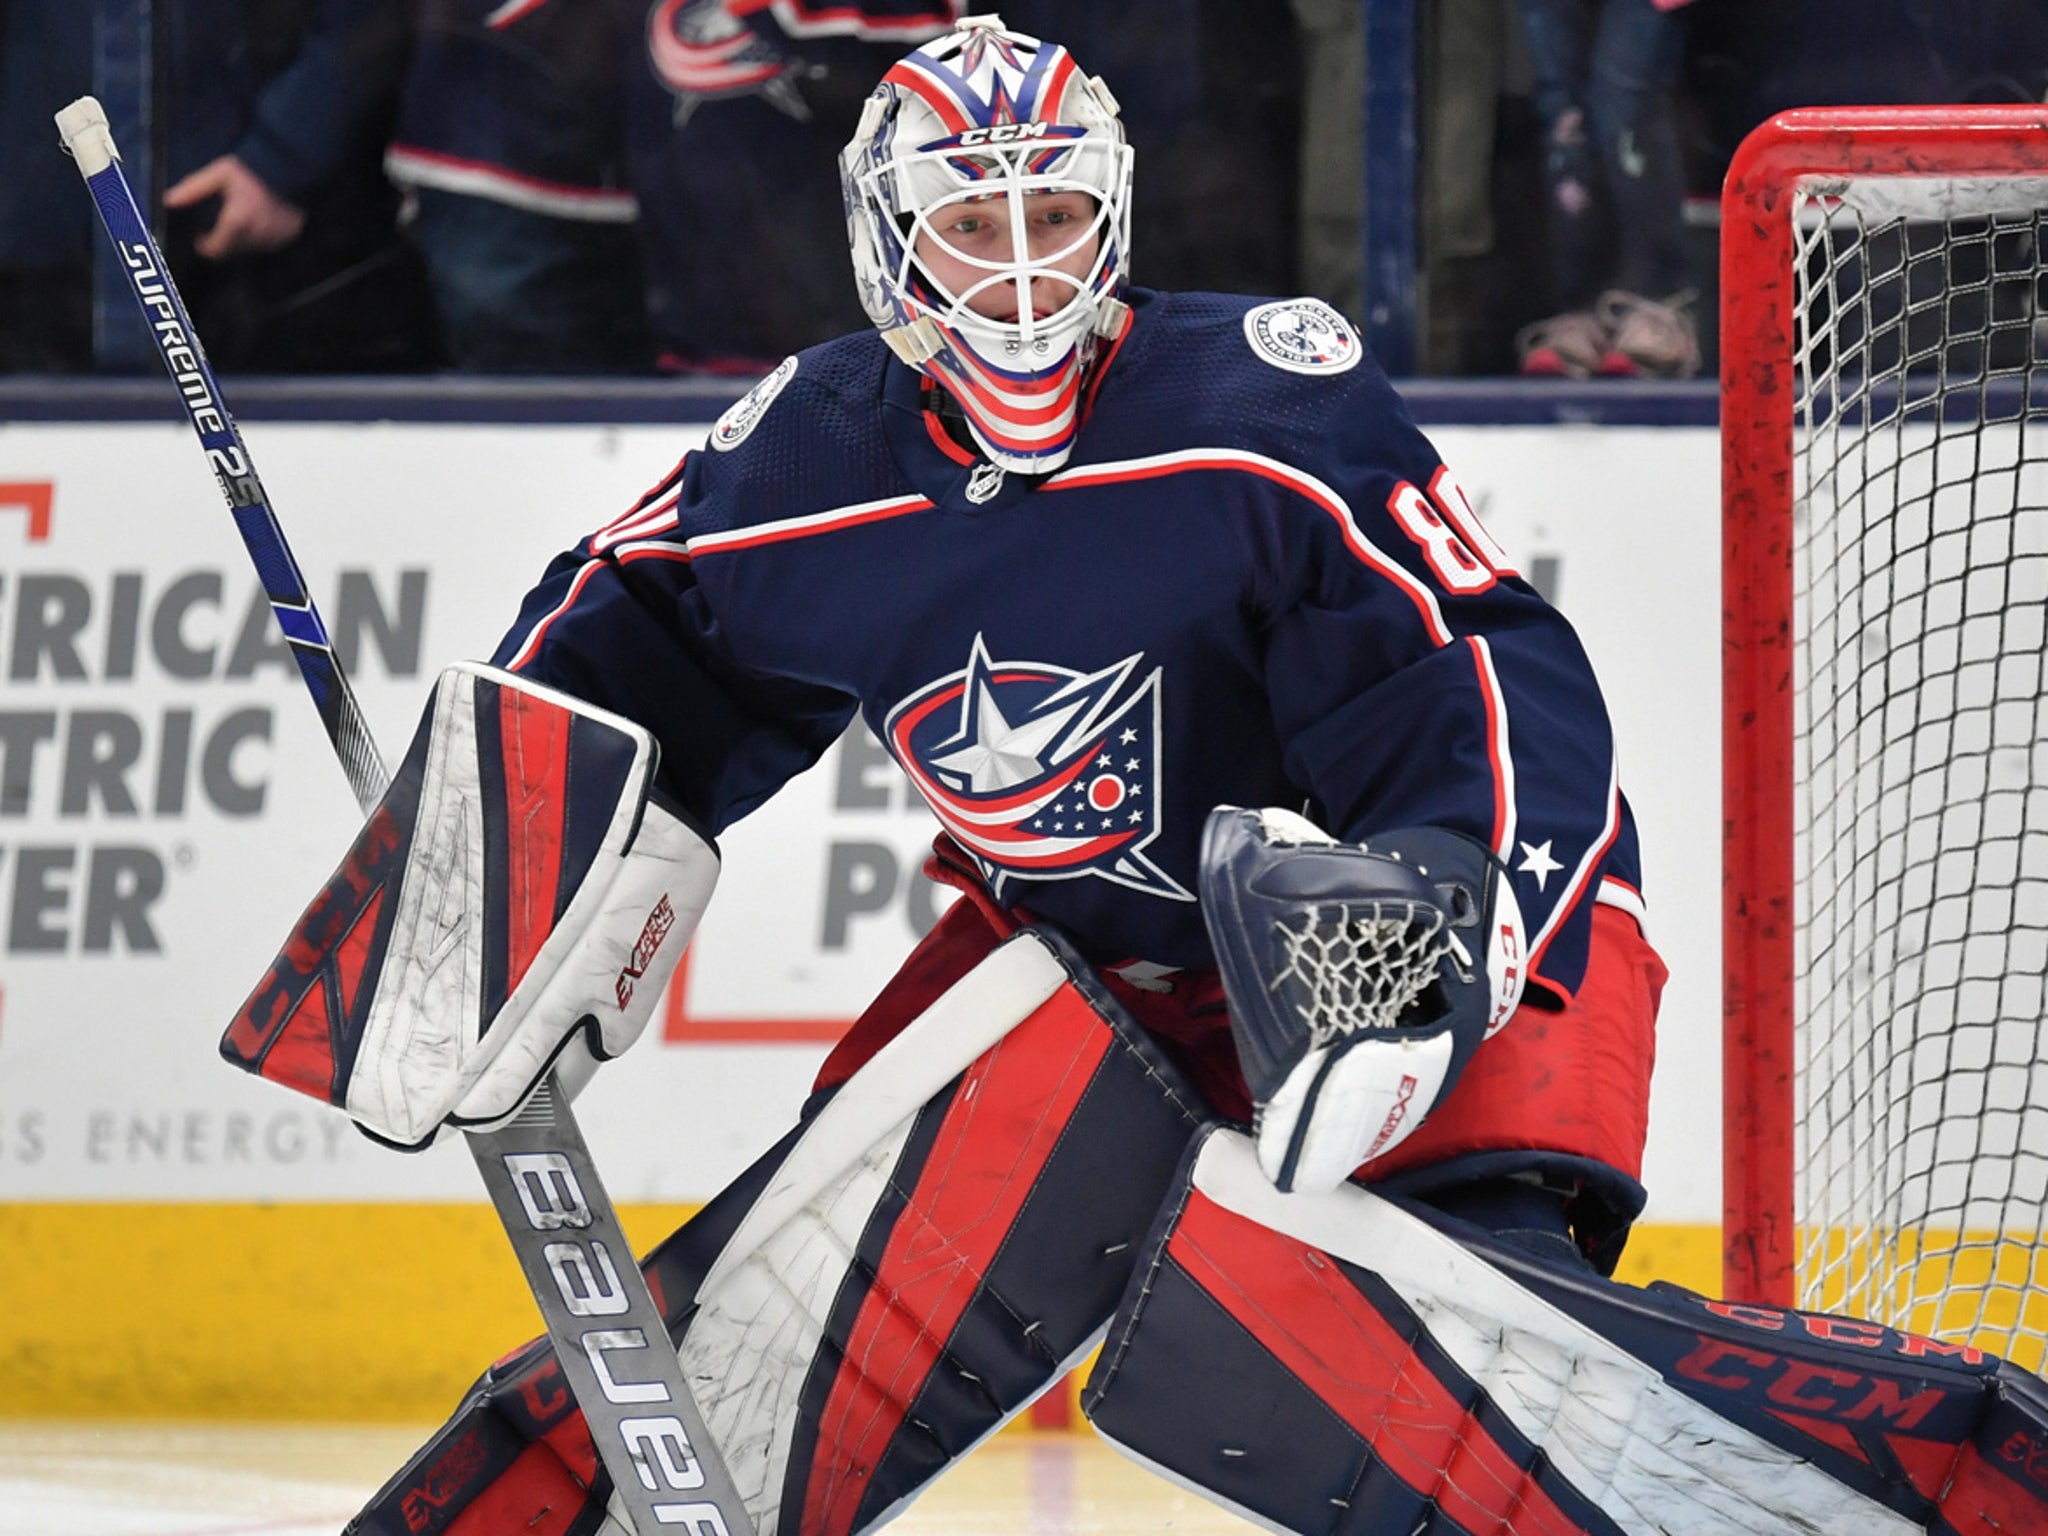 Blue Jackets goalie dies after fall in fireworks accident